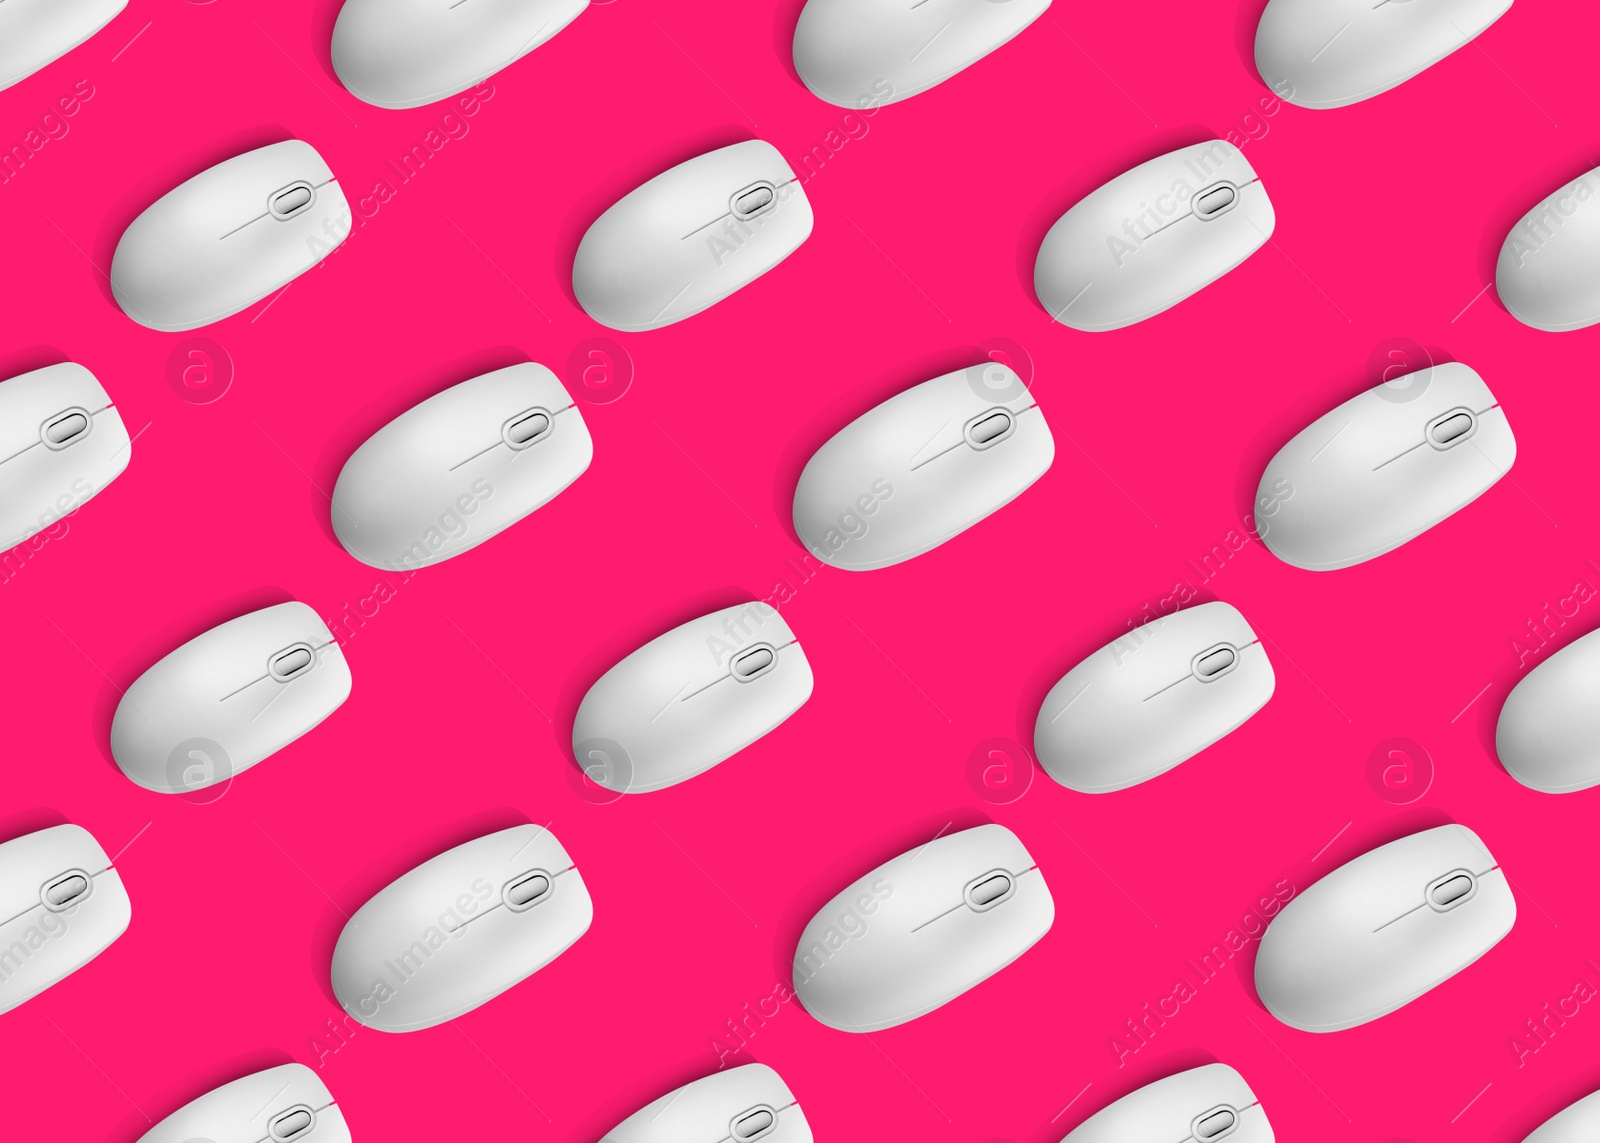 Image of Many white computer mouses on bright pink background, flat lay. Seamless pattern design